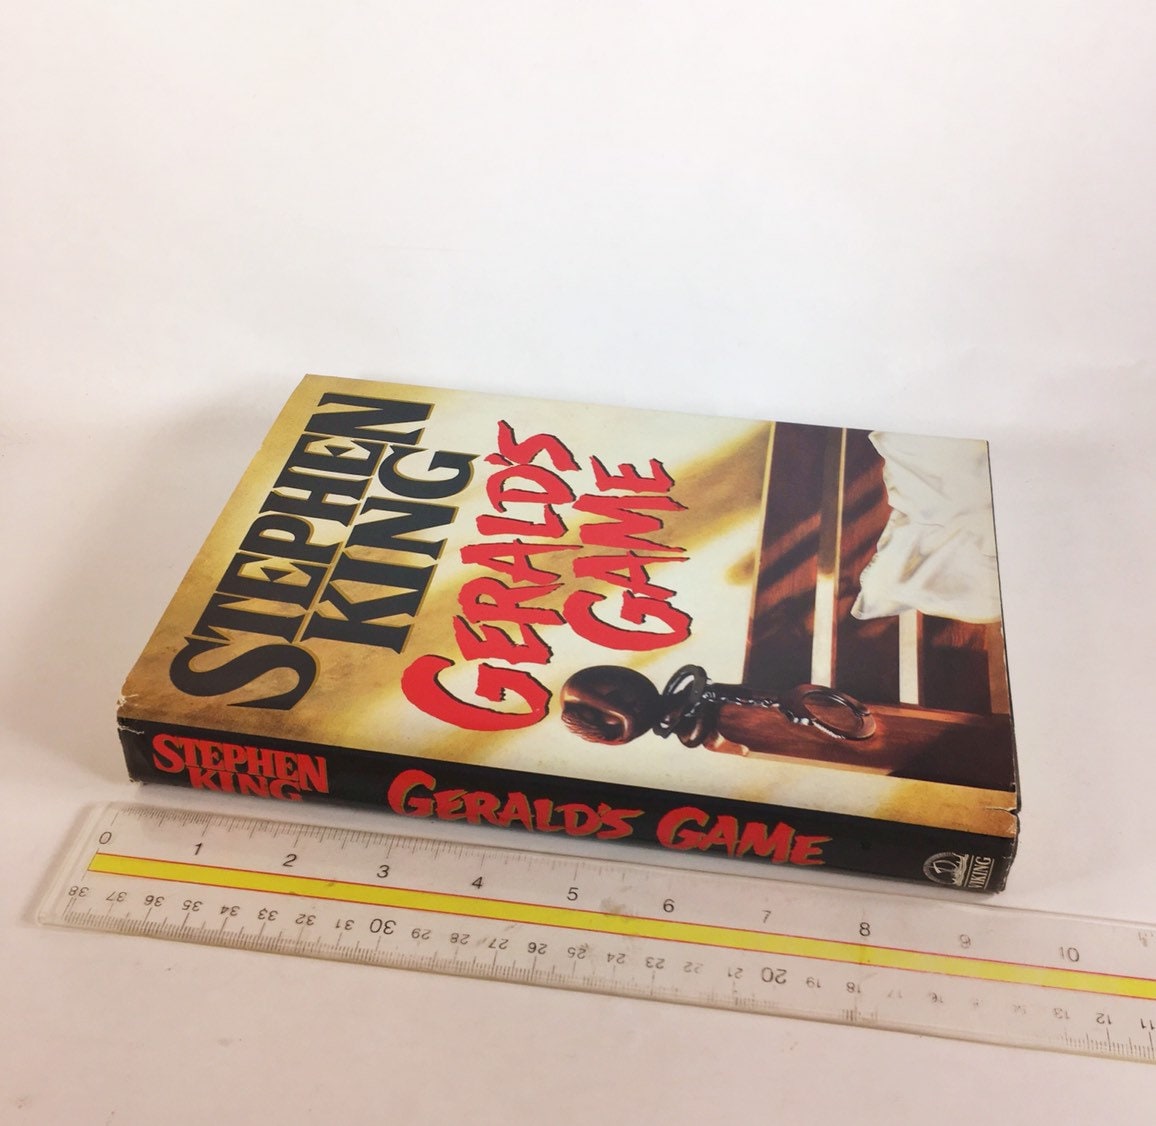 Gerald's Game by Stephen King FIRST EDITION First Printing vintage book circa 1992 with dust jacket. Collector gift decor